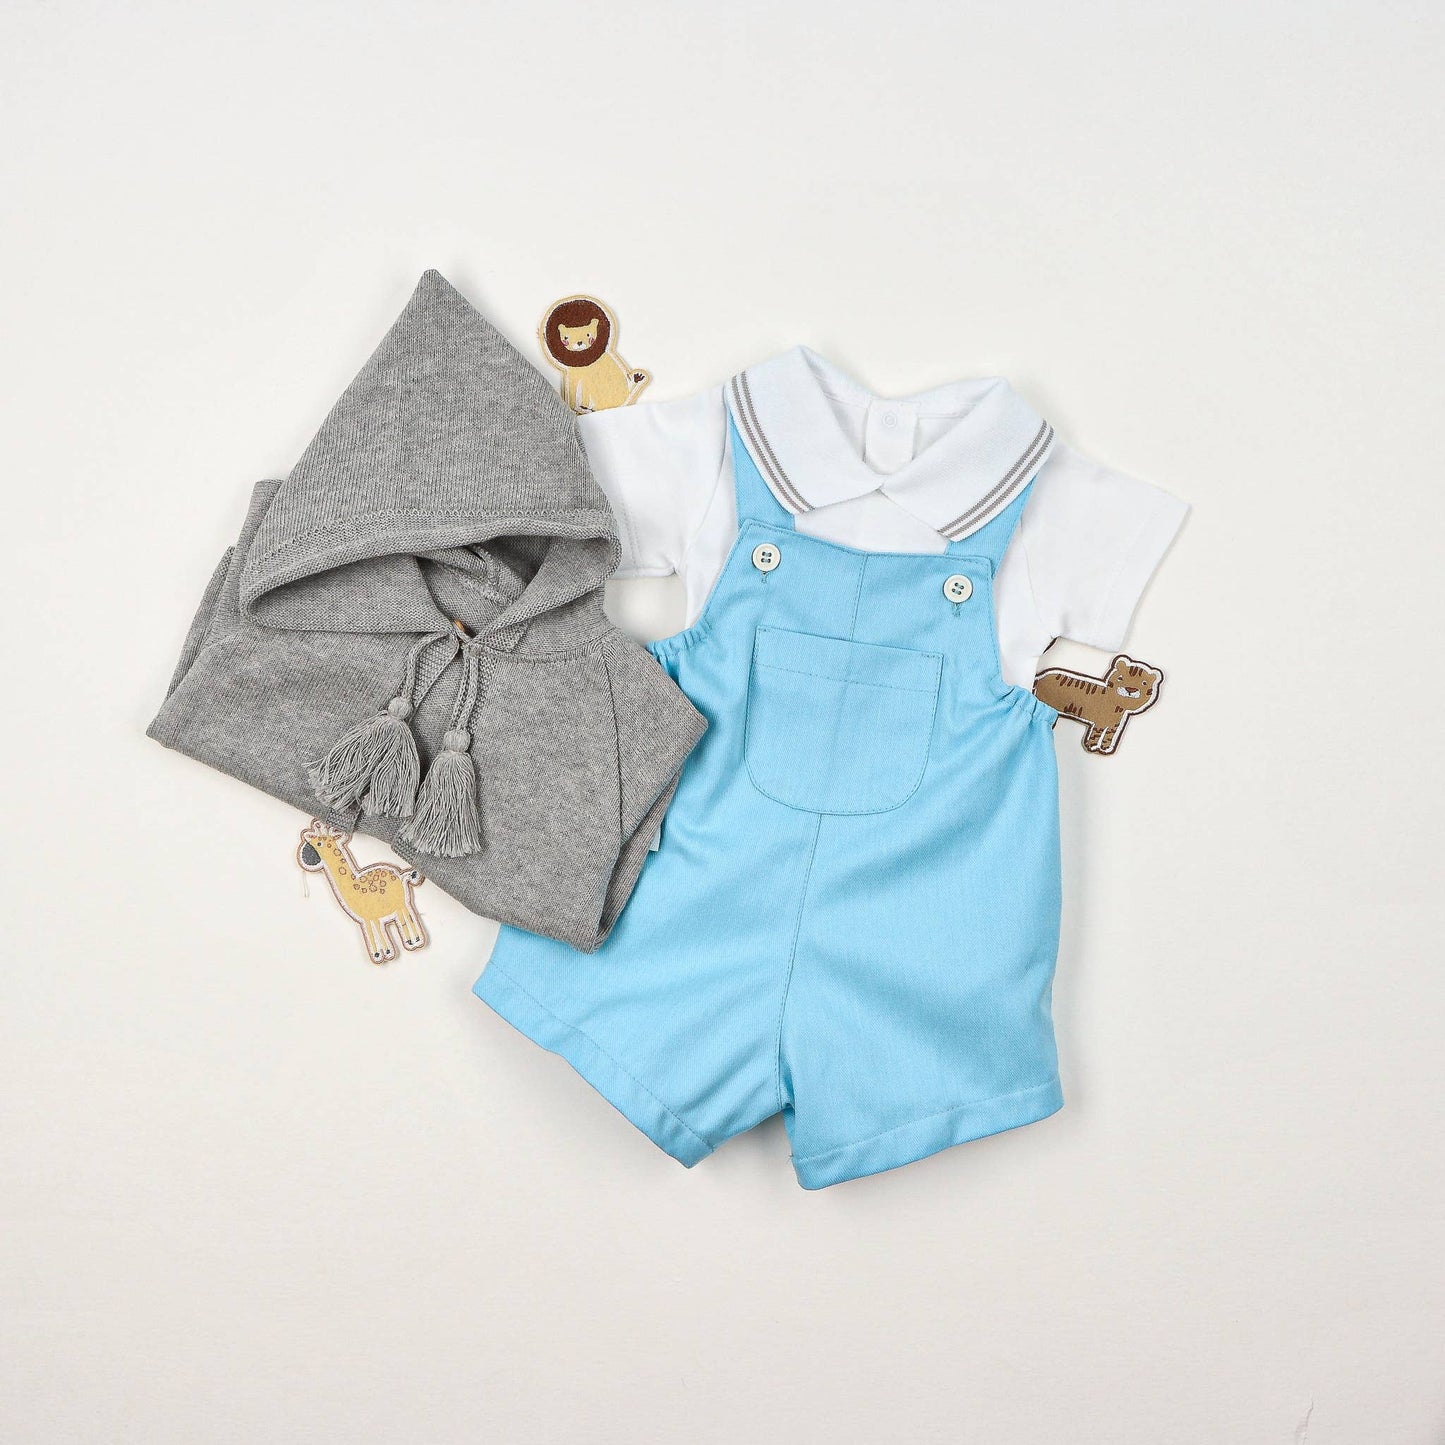 Cotton Baby Bodysuit Onesie with Polo-Style Collar: 1-3M / Short Sleeve / Light Blue